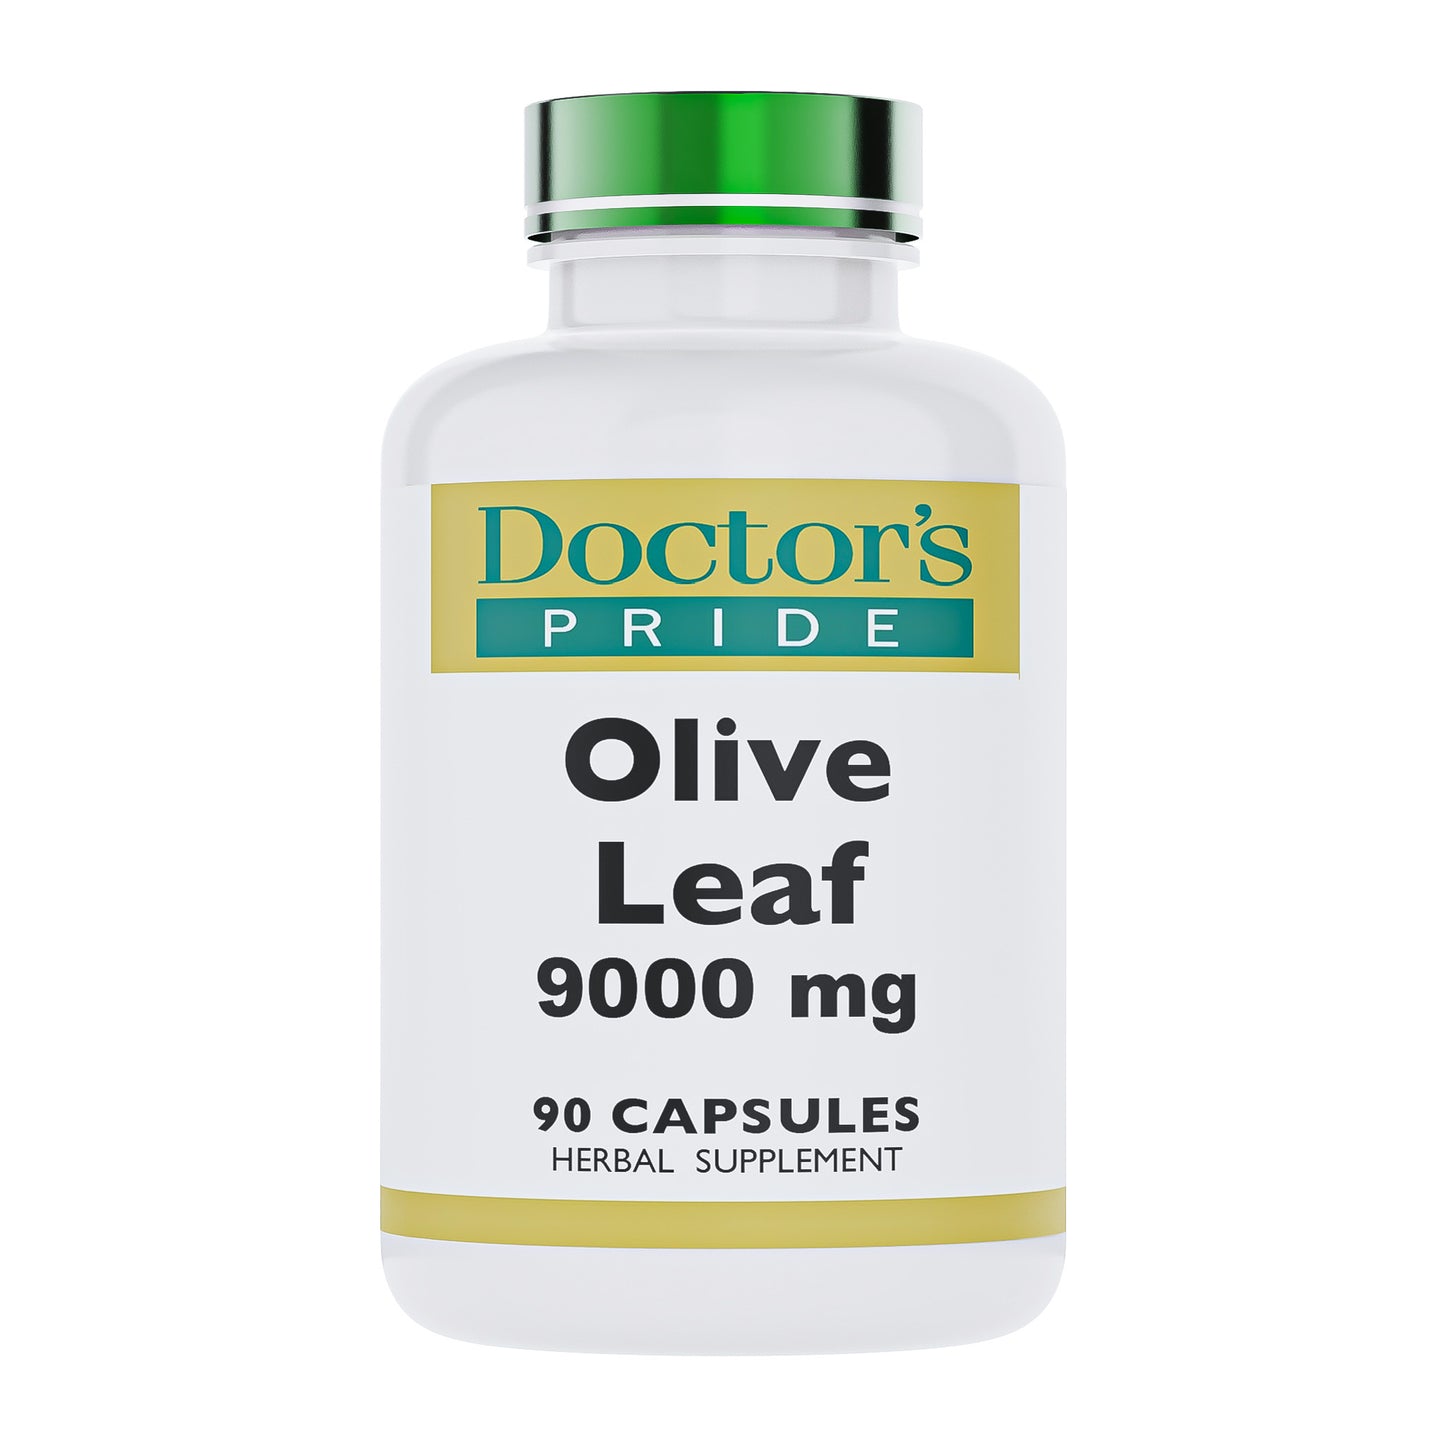 Olive Leaf Extract 9000 Mg - 90 Capsules